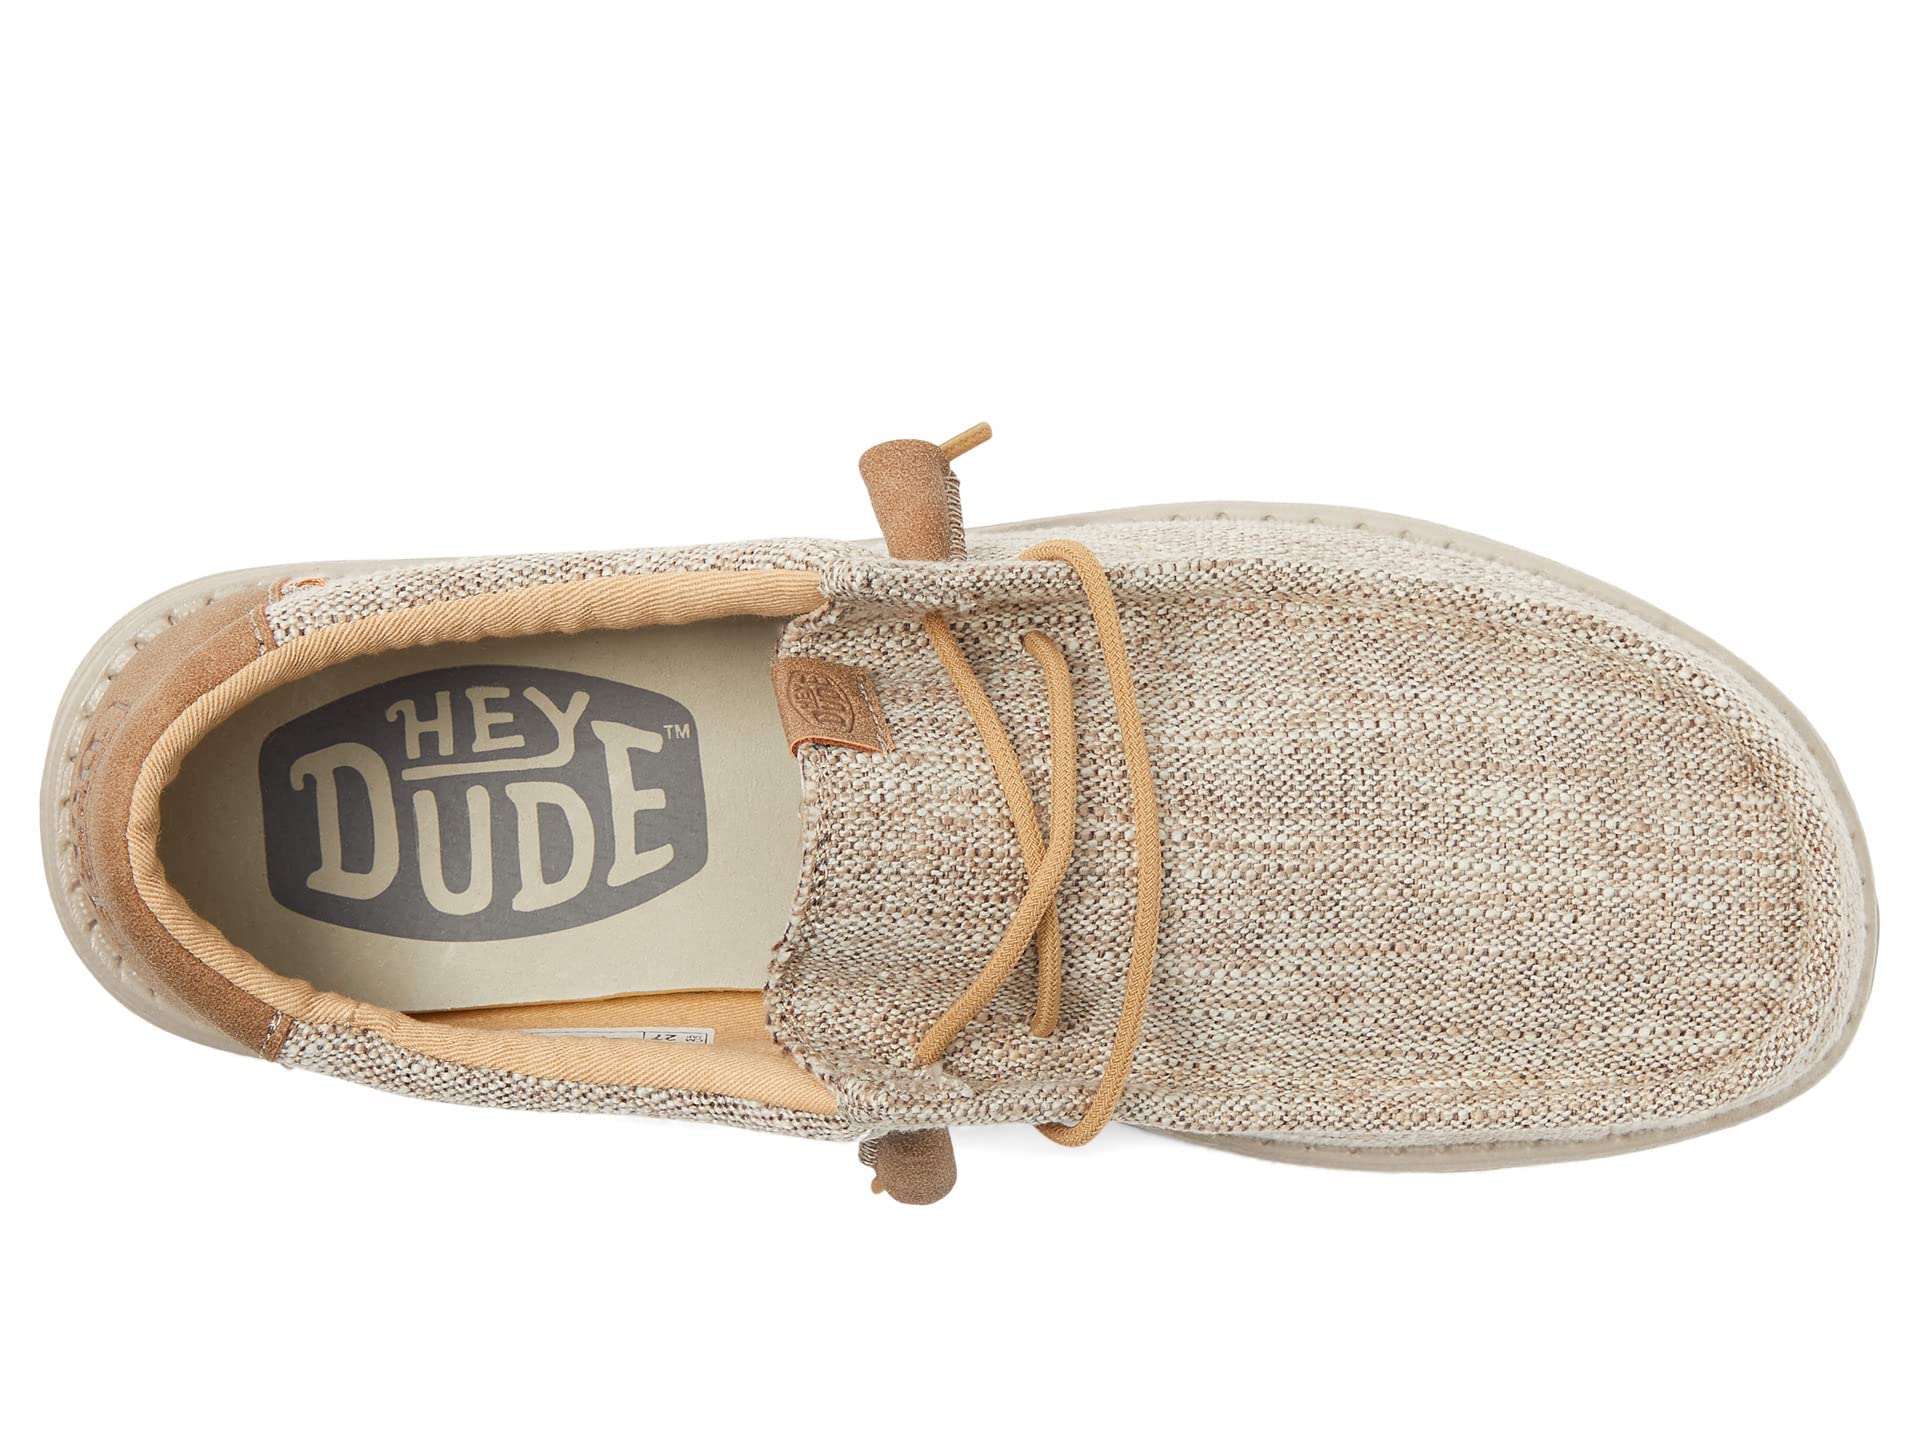 Hey Dude Wally Ascend Woven Loafer for Men, and Women - Textile Upper, Lace Detailing, Slip-On Style, and Round Toe Design